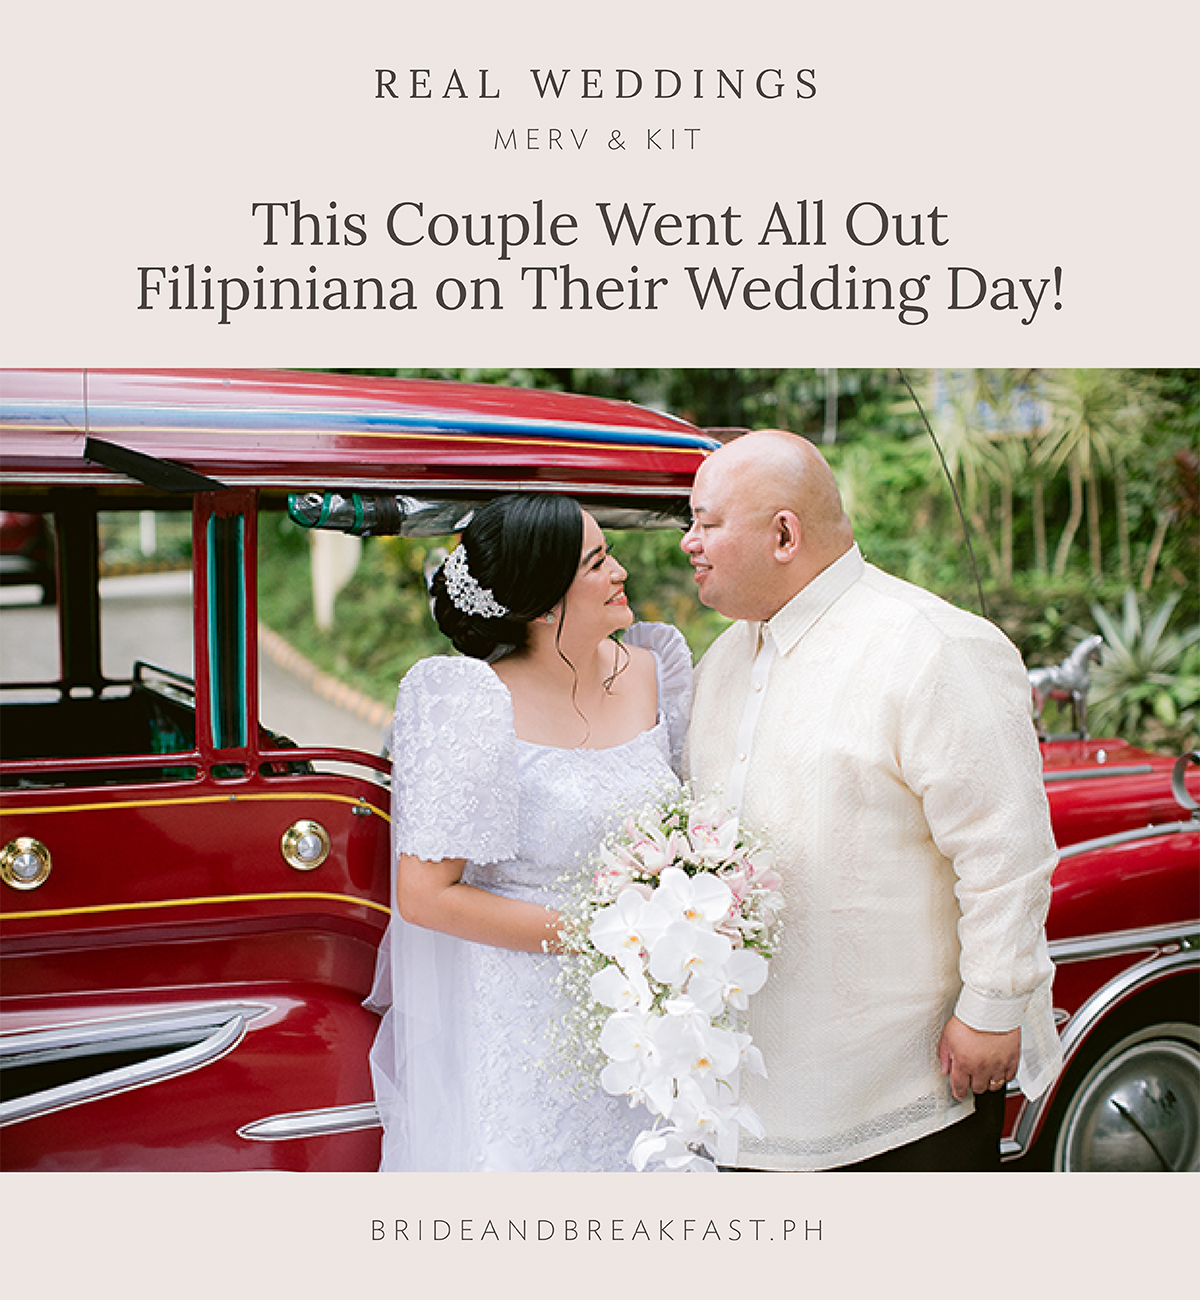 This Couple Went All Out Filipiniana on Their Wedding Day!